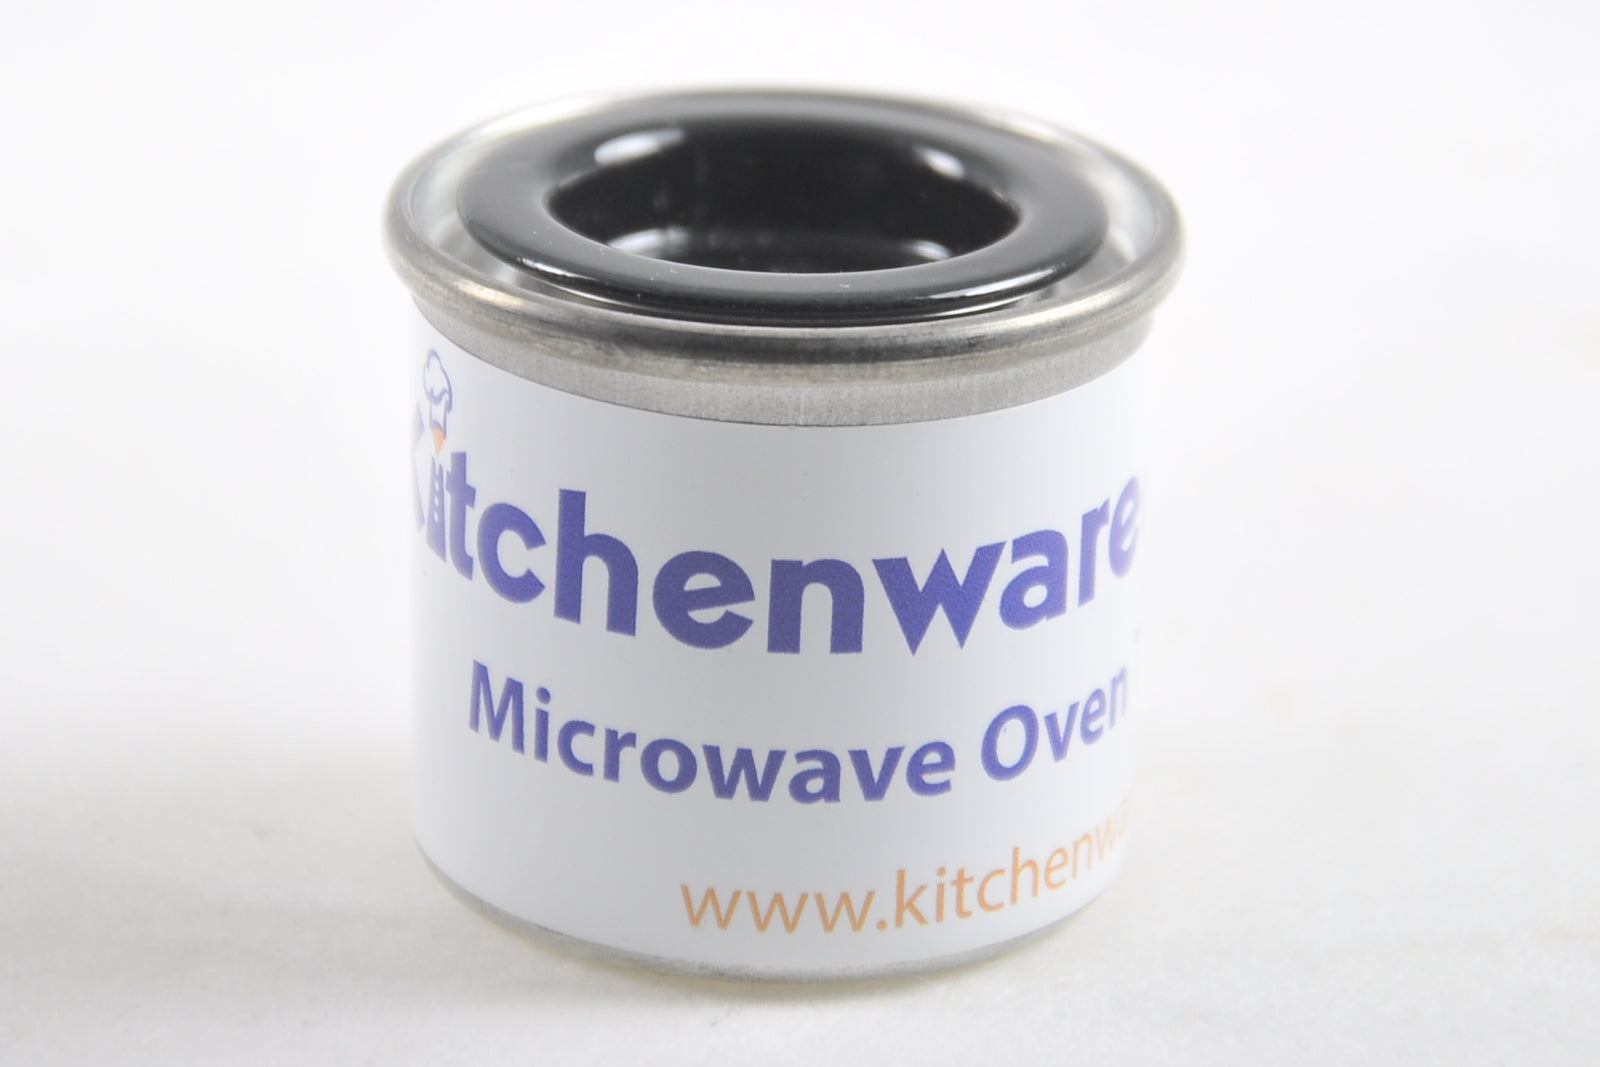 Microwave oven touch up paint kit - Black